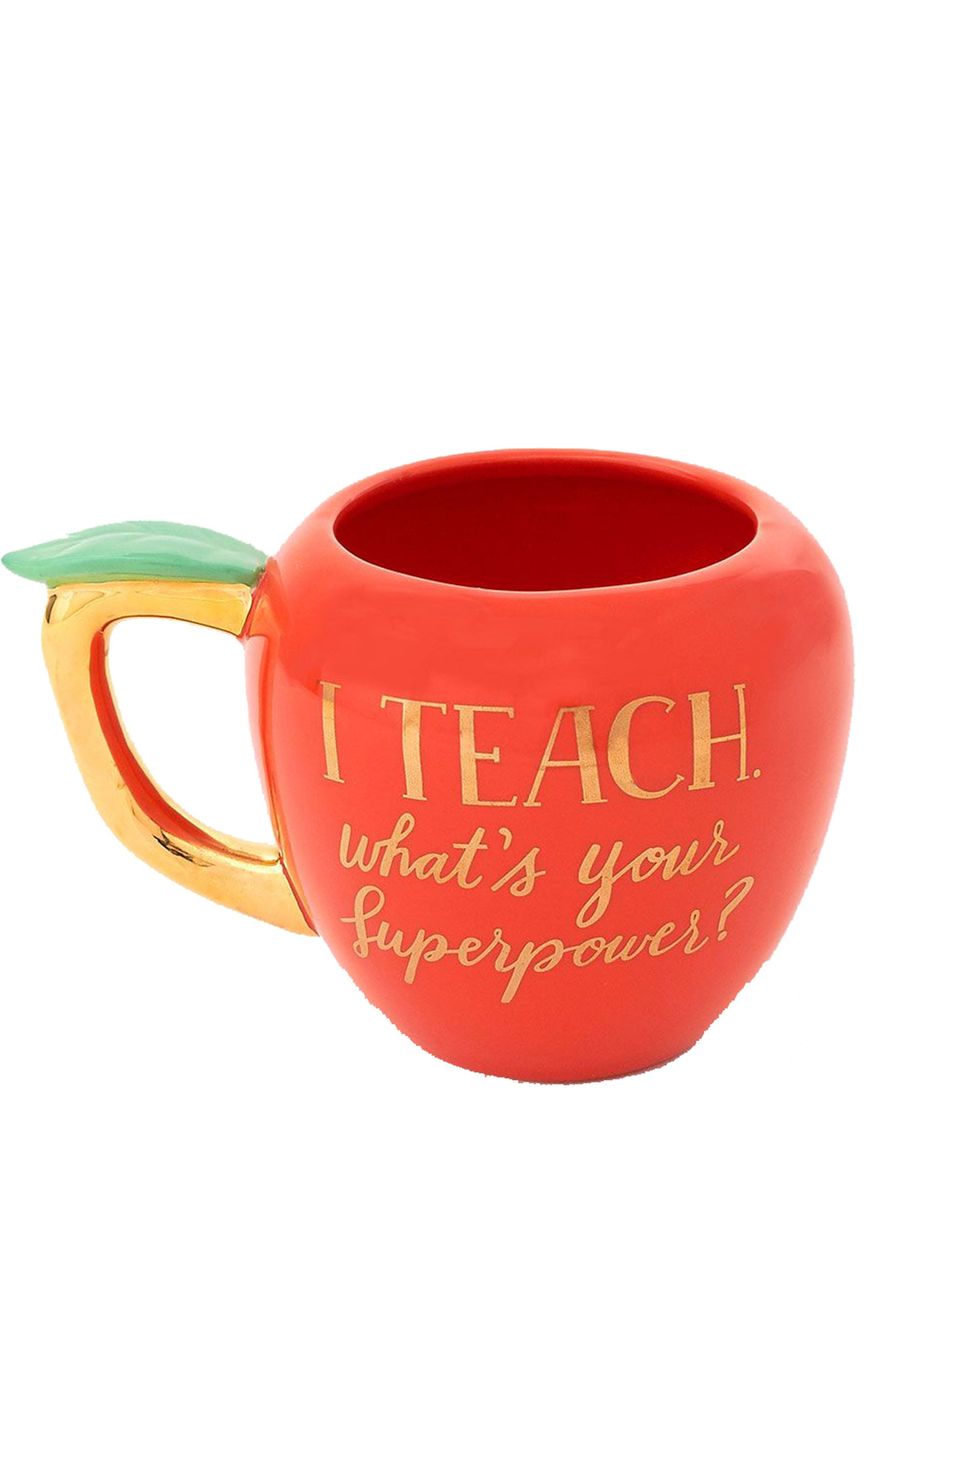 Best teacher gifts to celebrate the end of term